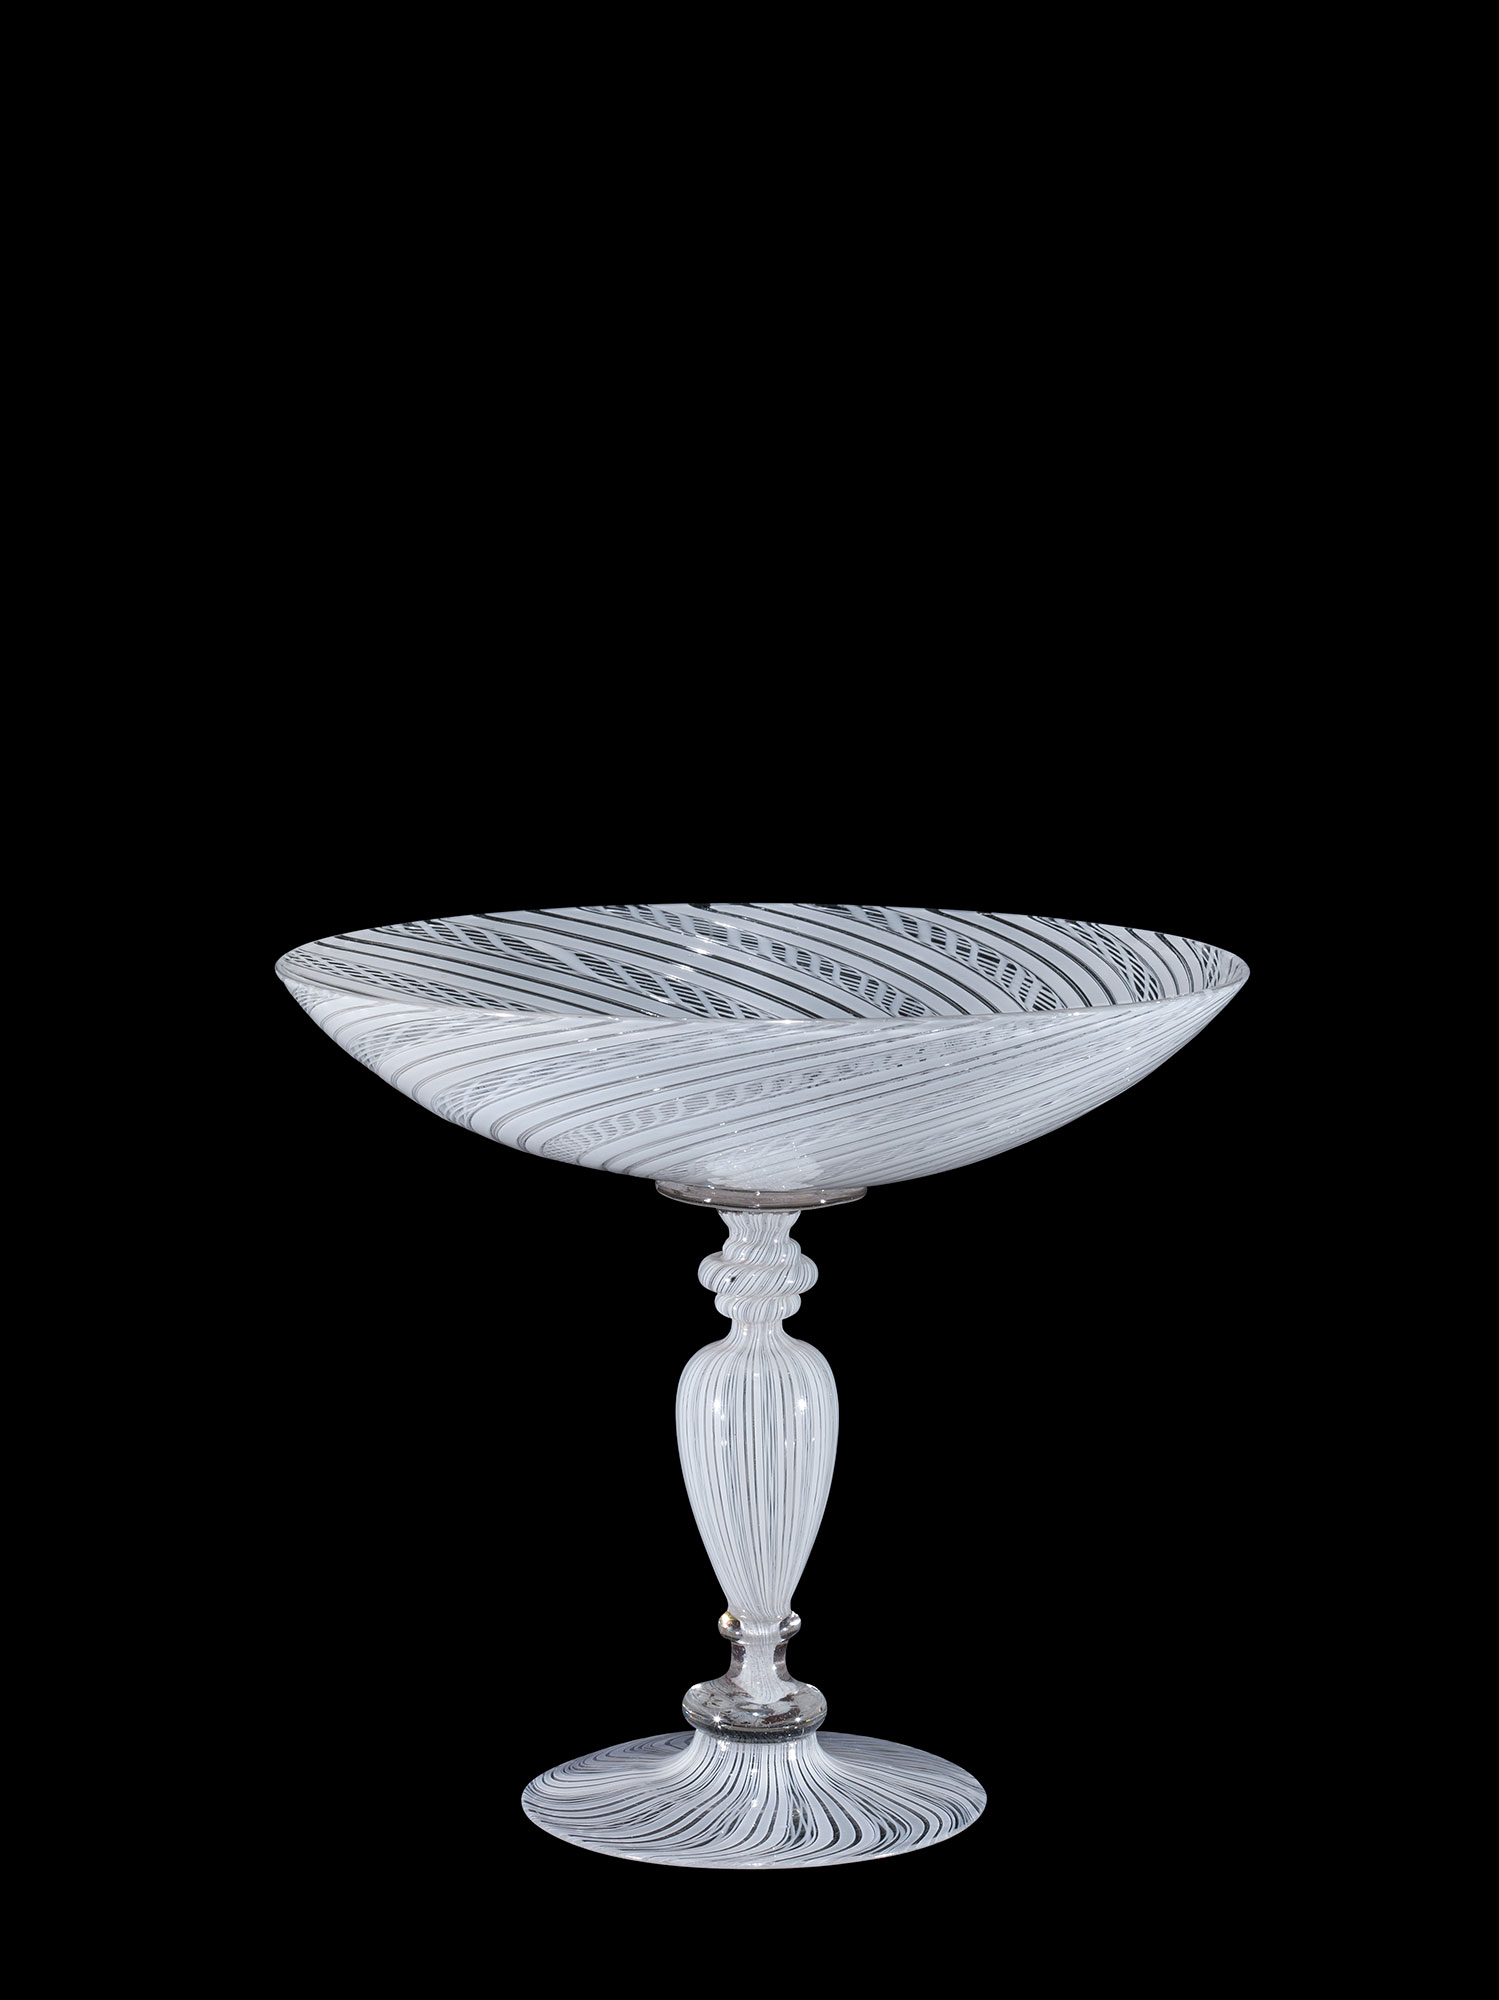 Clear wineglass with grayish, white stripes and a shallow bowl